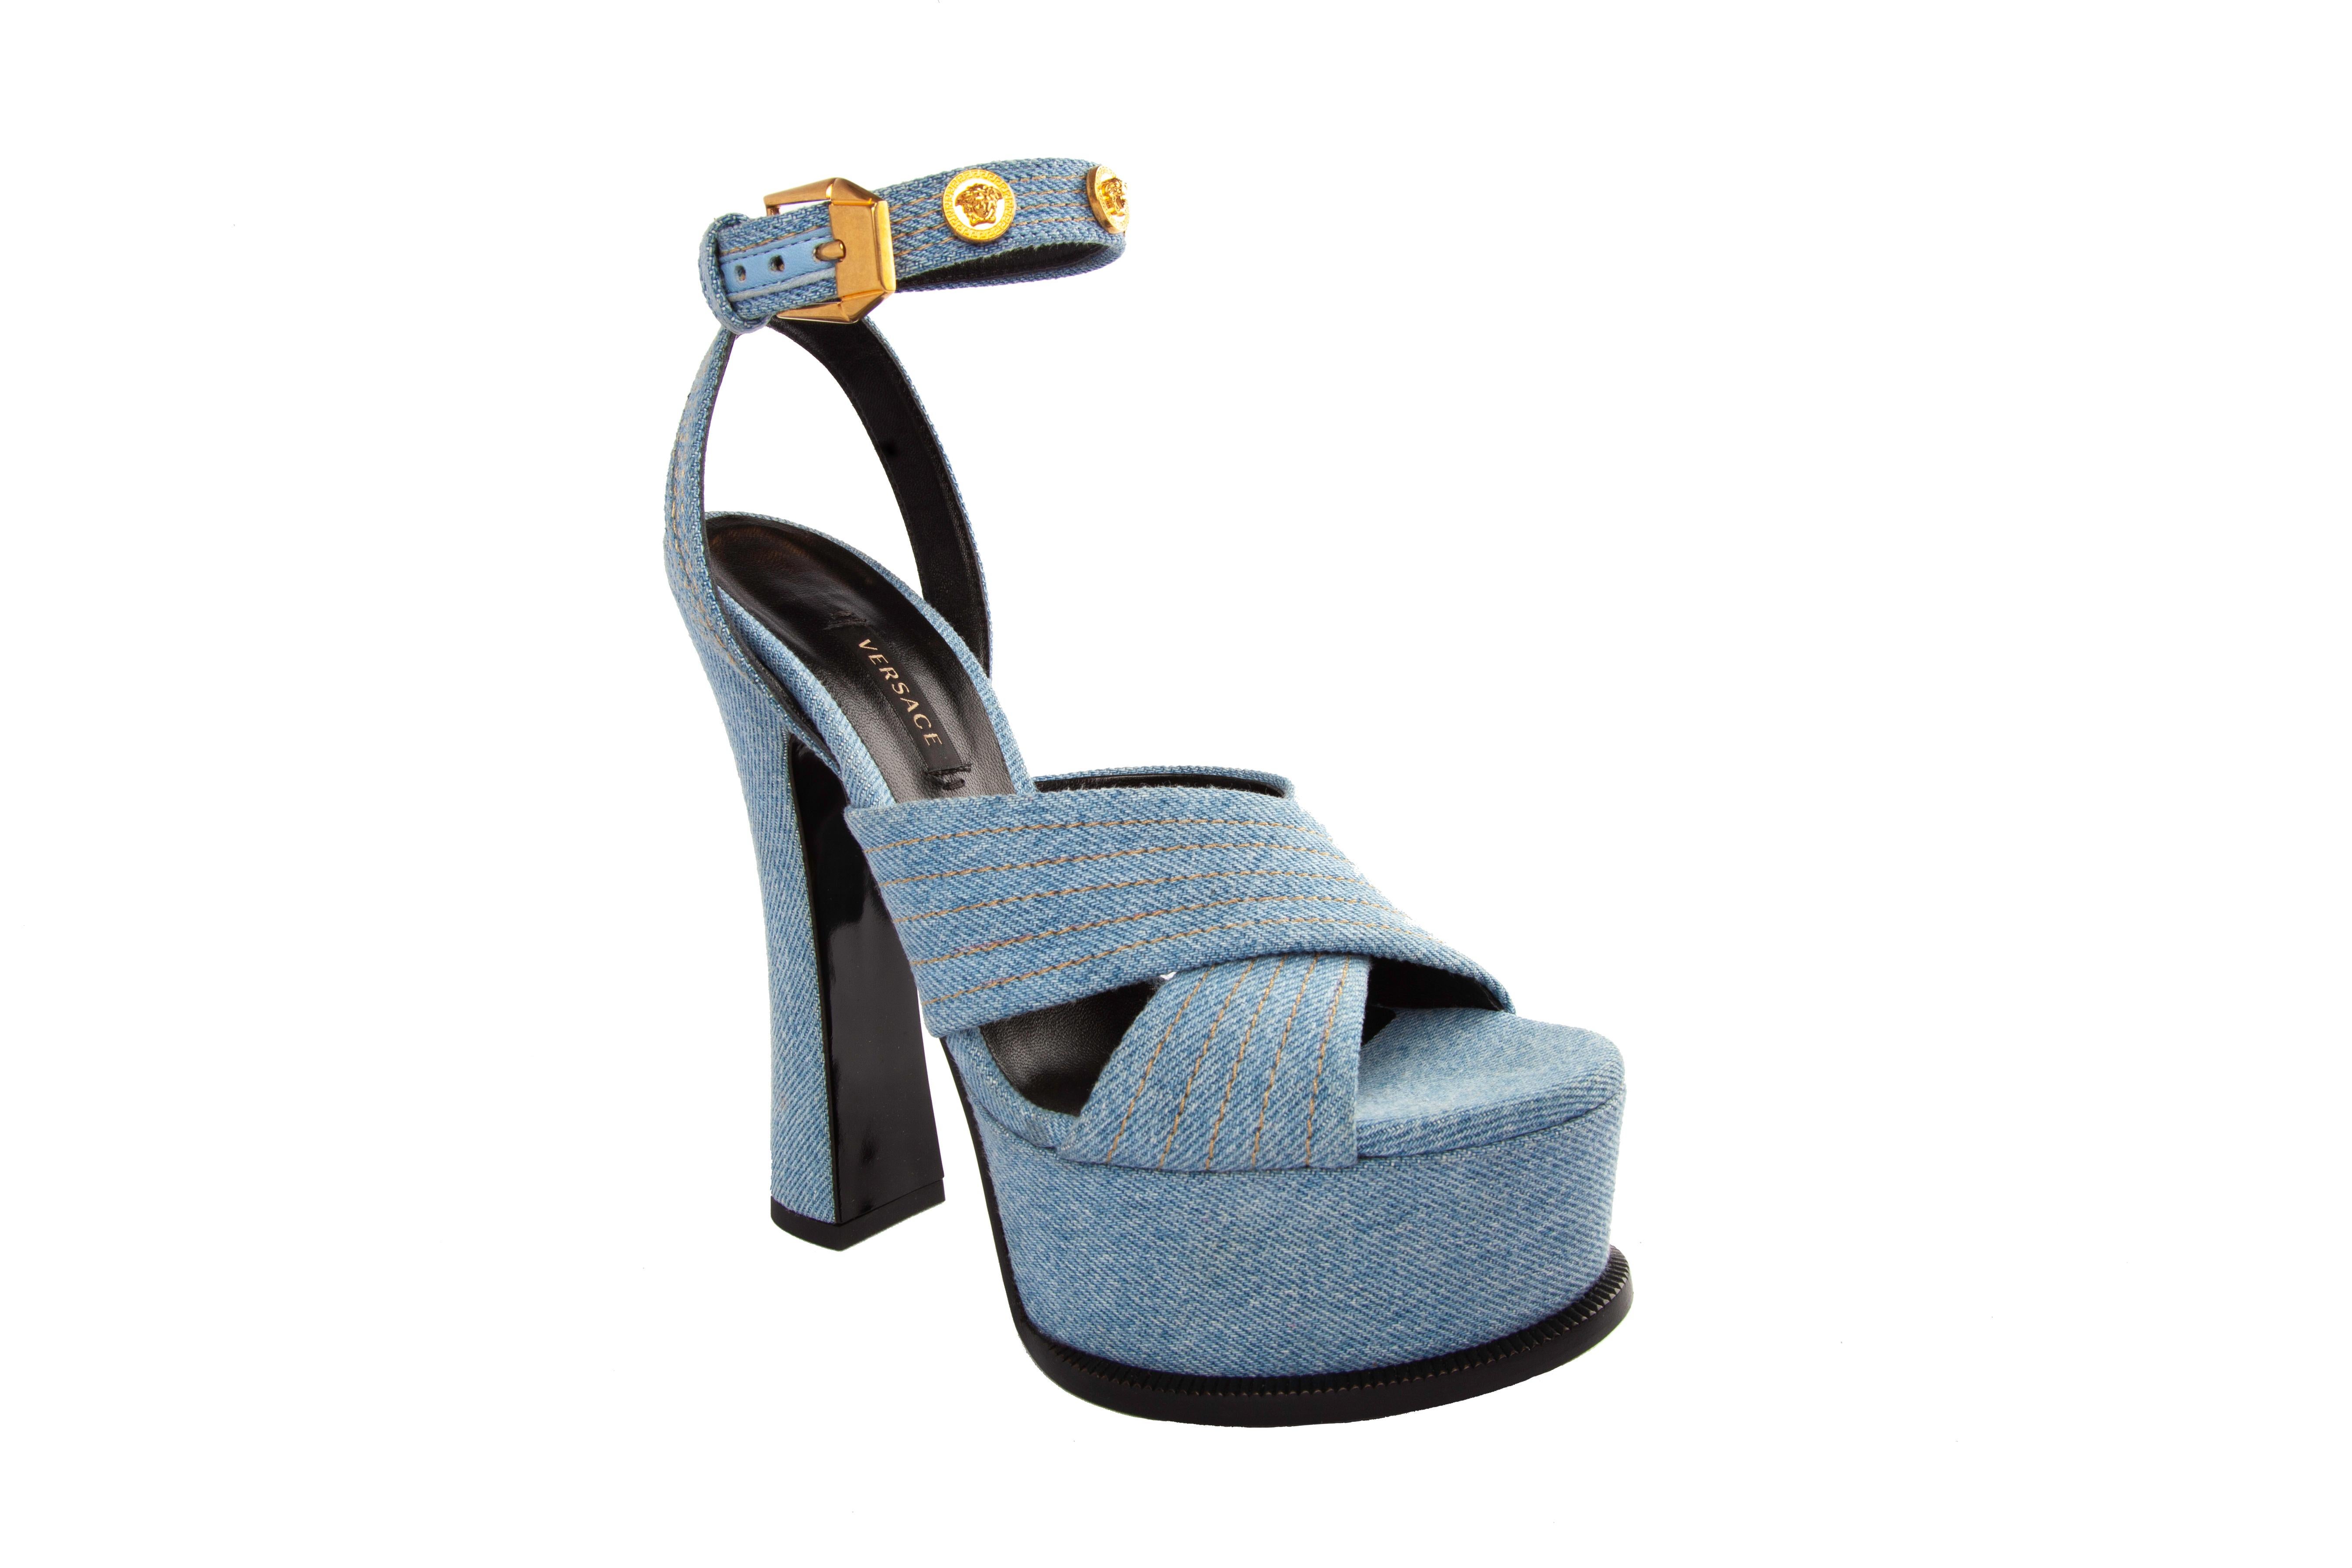 Versace Blue Denim High Heel Platform Sandal With Gold Tone Hardware Size 38

These Versace sandals feature a light blue denim fabric, gold tone Medusa studs, and an adjustable ankle strap. This pair was the store display model, so it shoes very